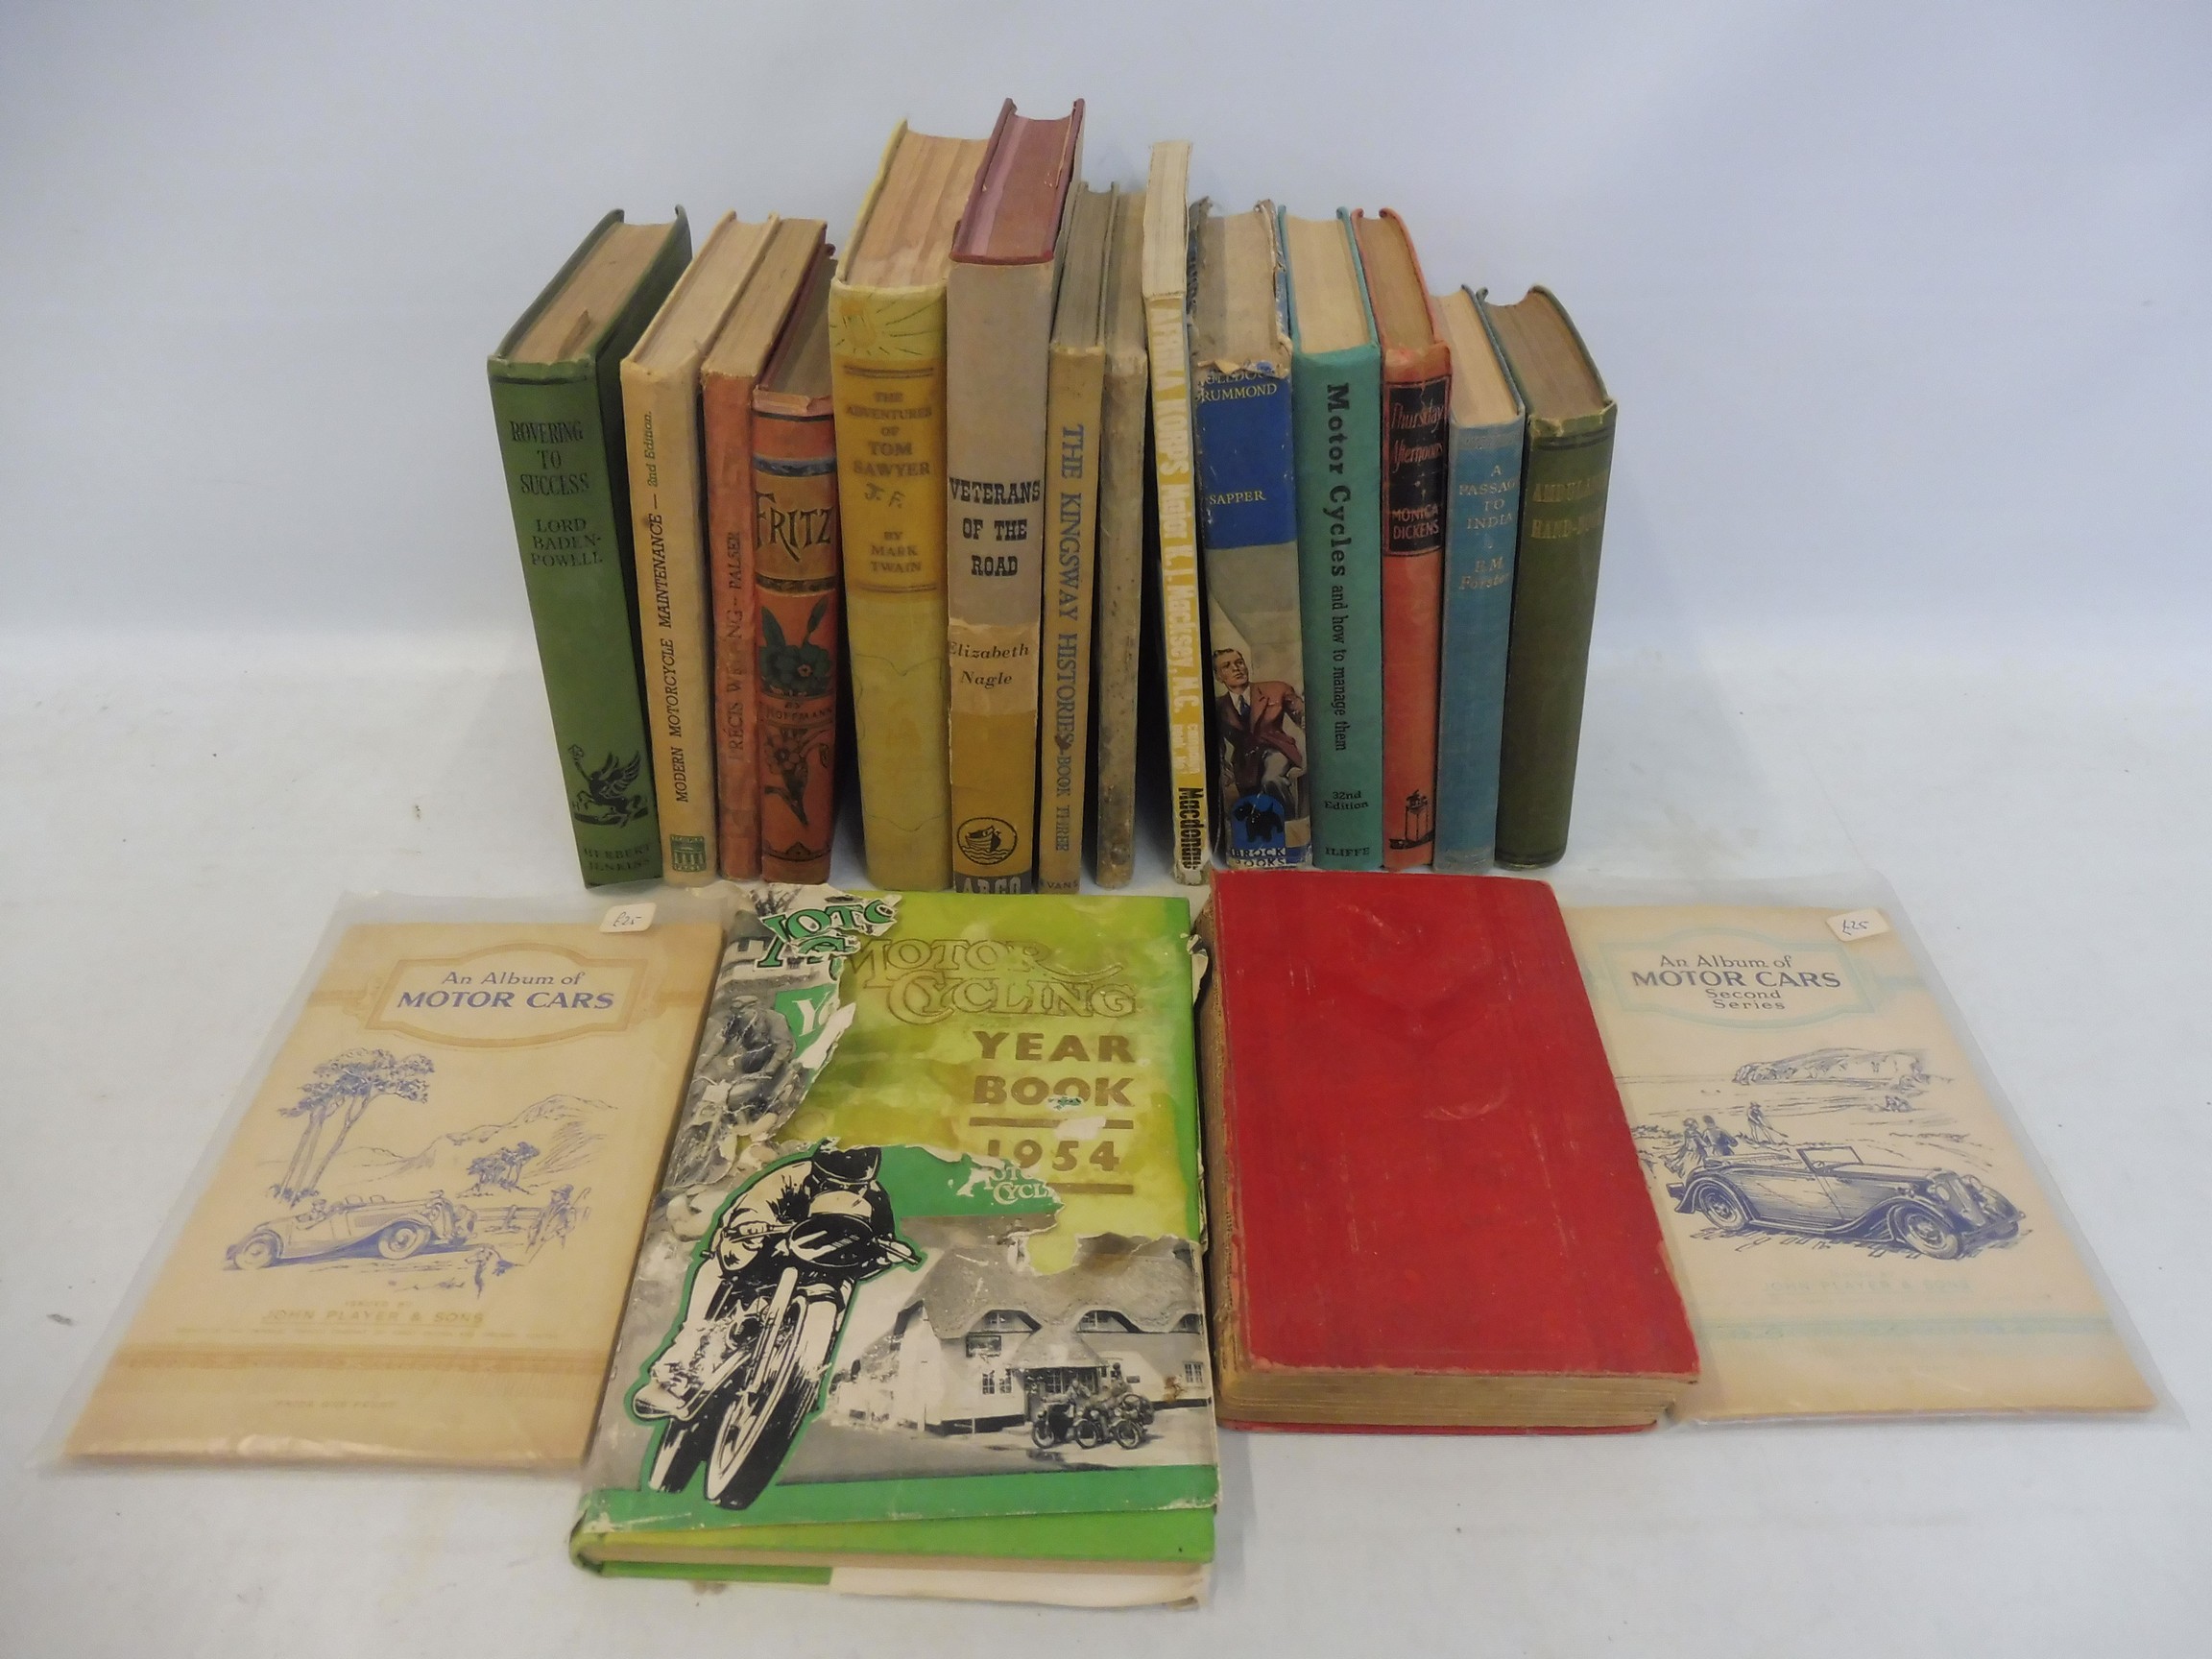 A selection of assorted early books including motoring, plus Fritz by Franz Hoffmann.